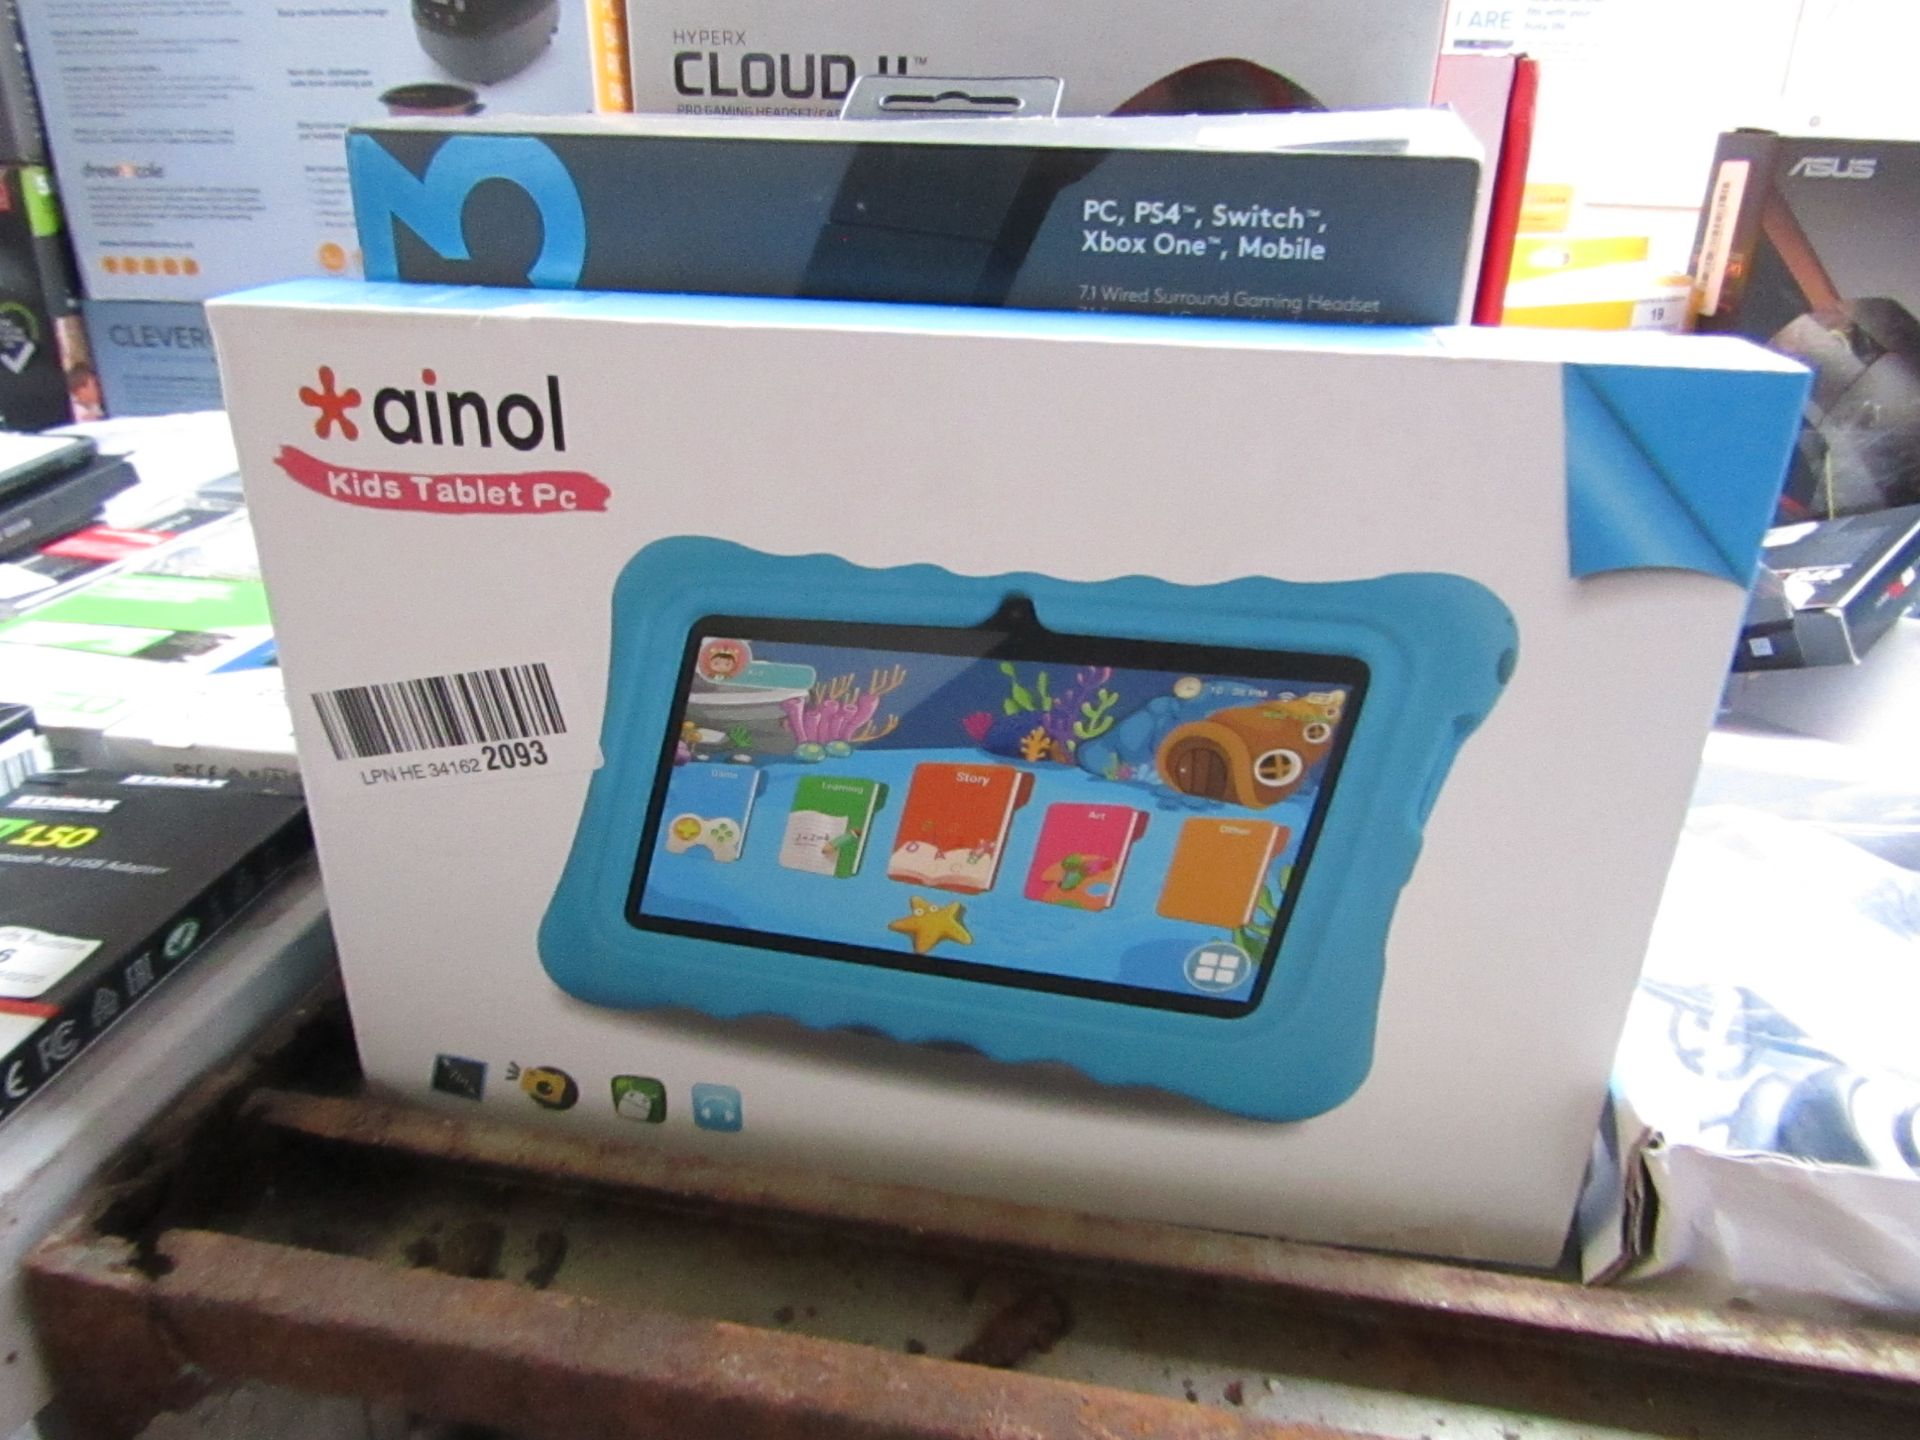 Aninol kids tablet, untested and boxed.